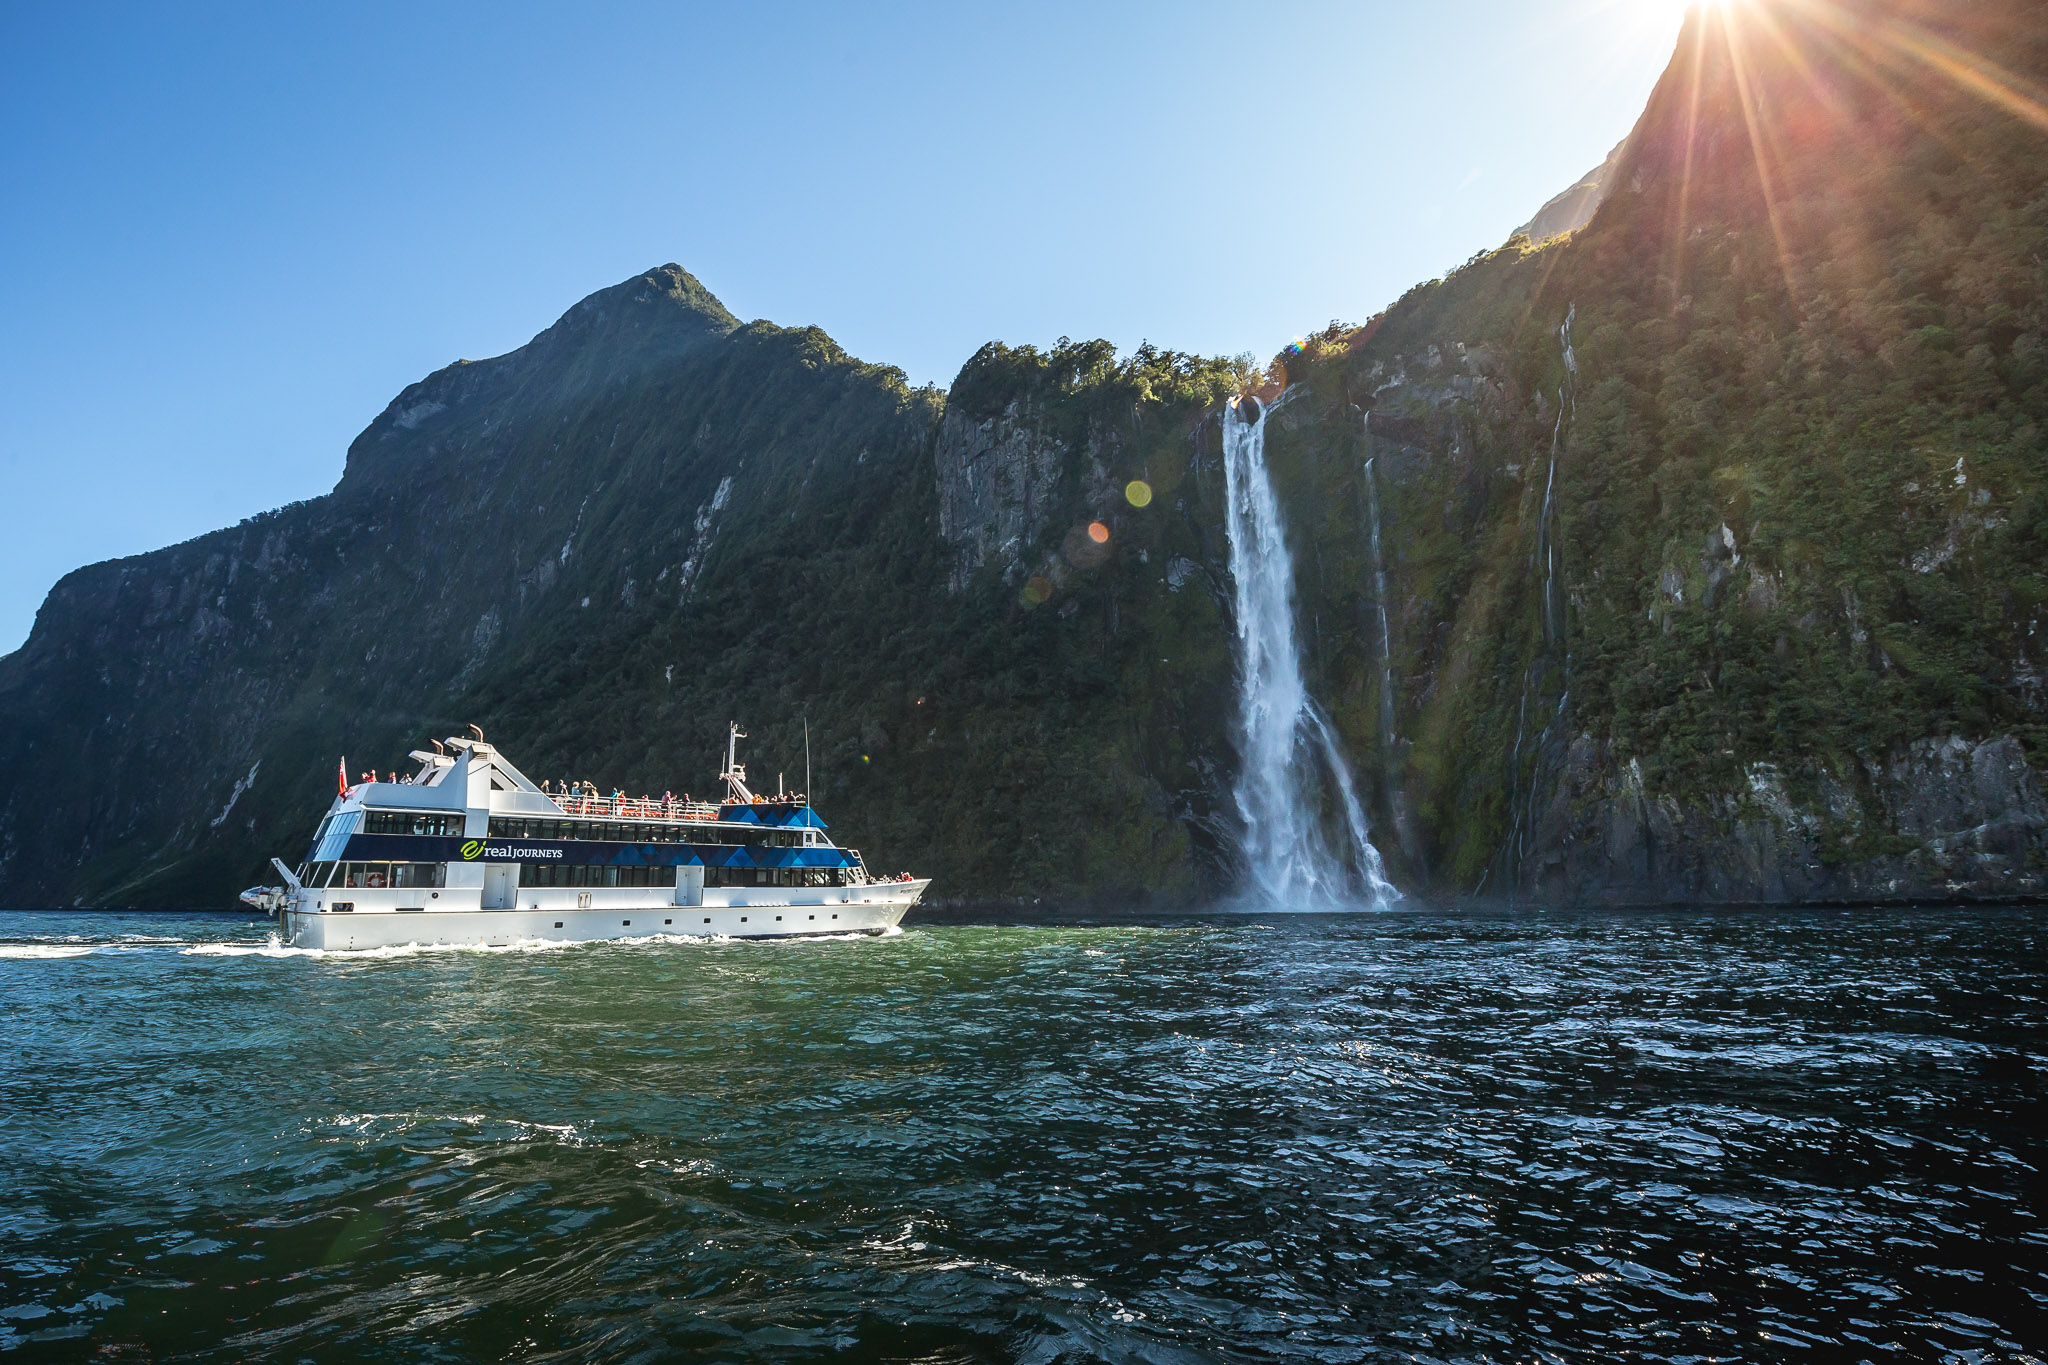 Milford Sound scenic cruise vessel by Stirling Falls